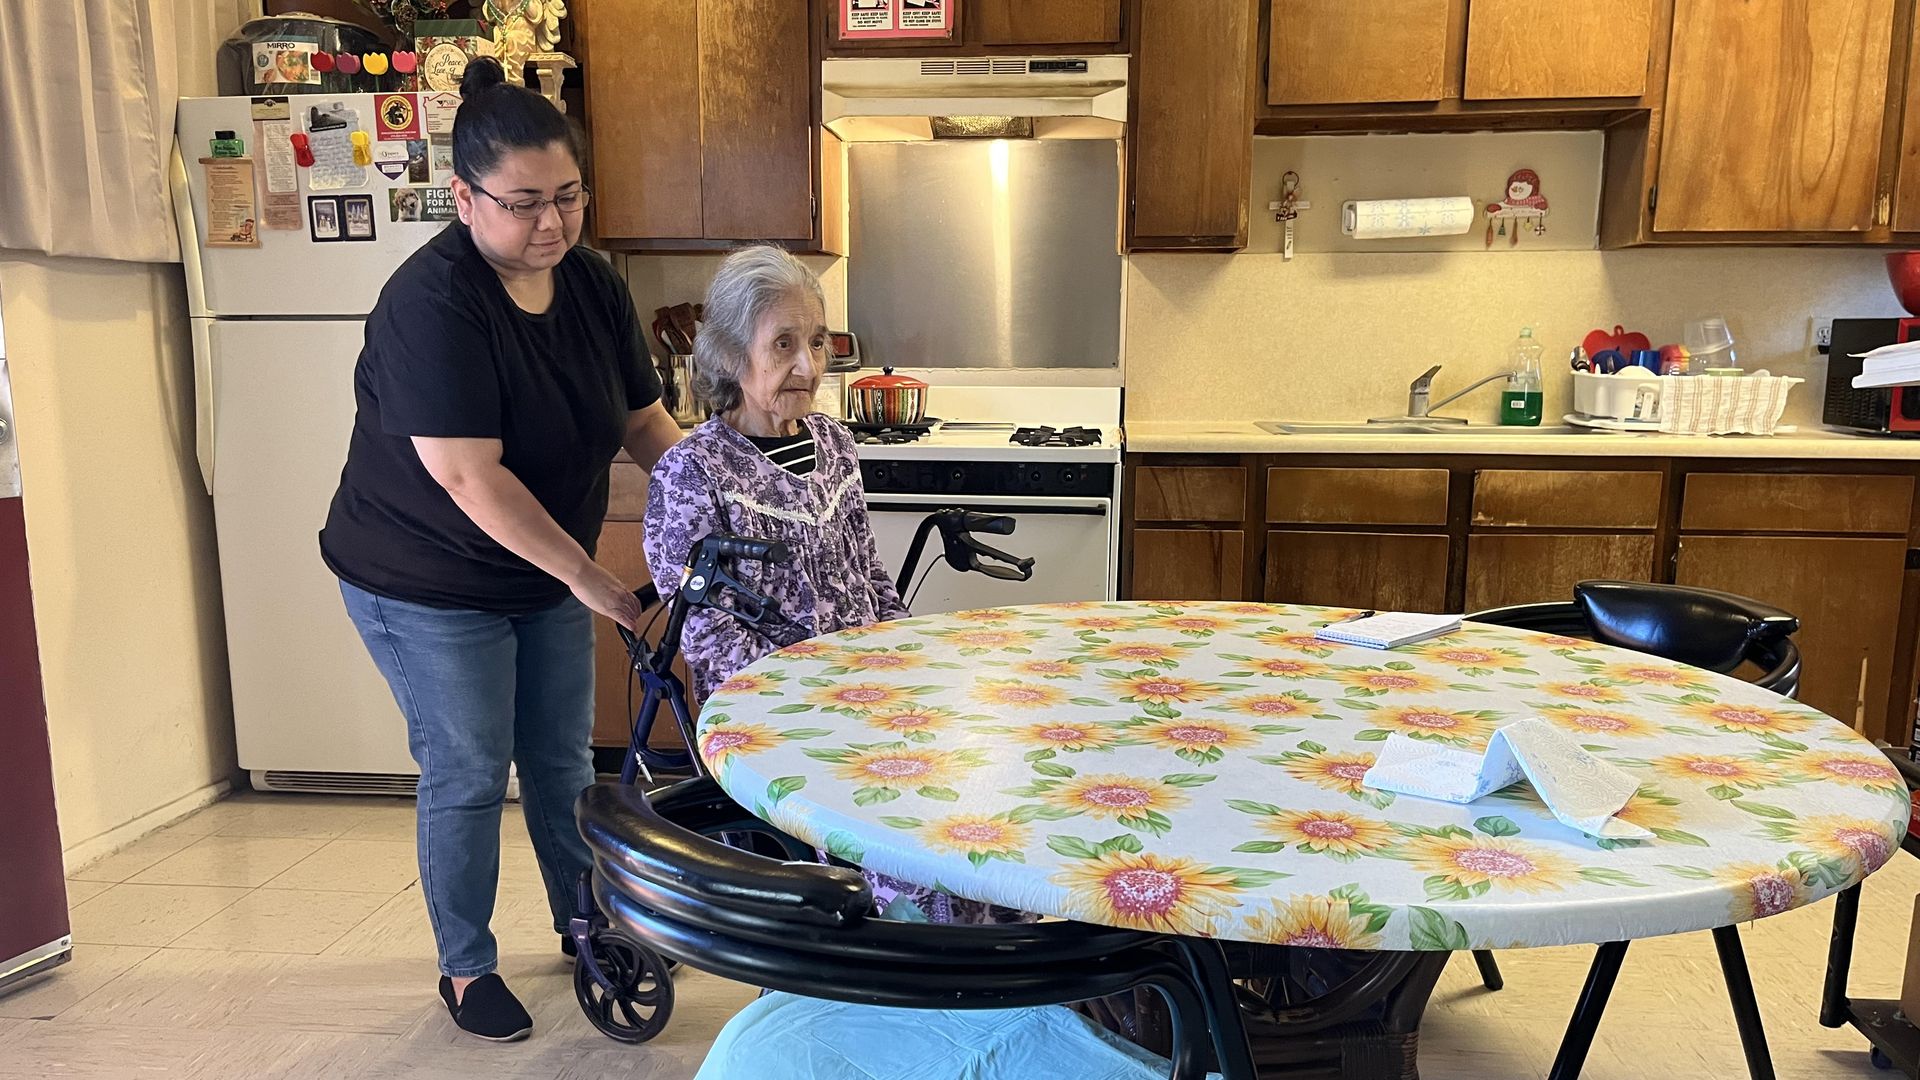 A woman helps an older women in a wheelchair sit down at a kitchen table.